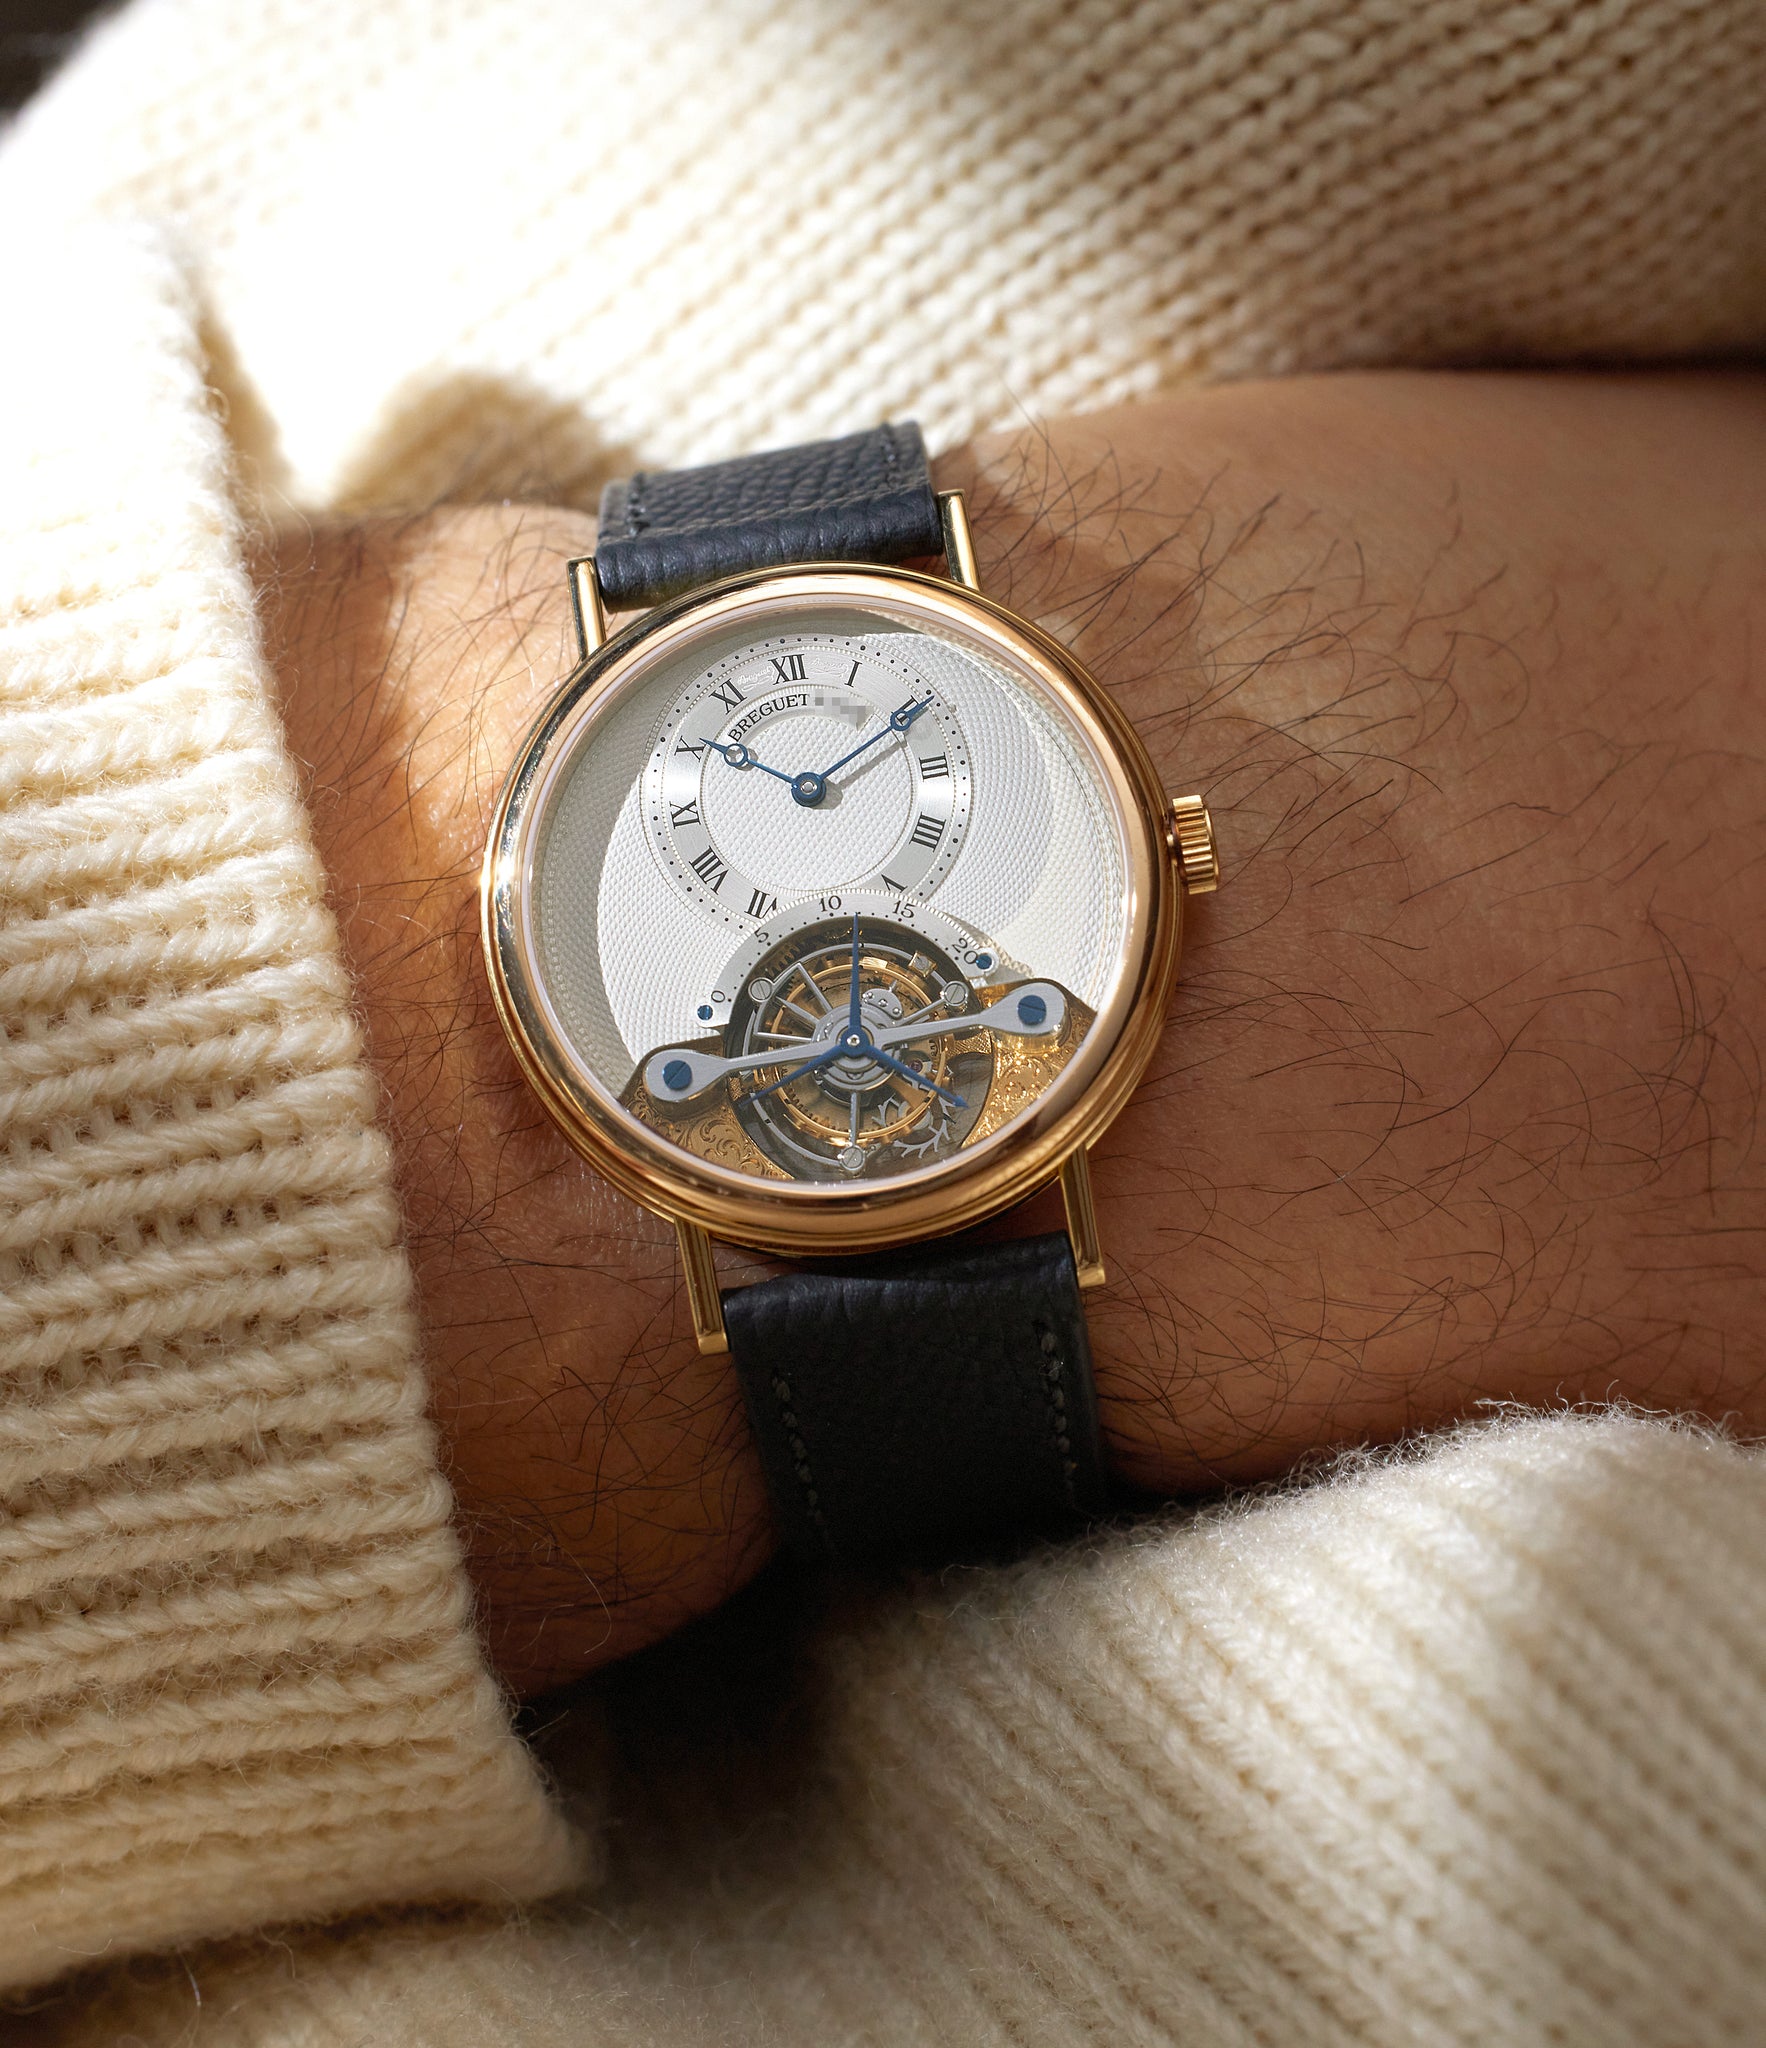 On-wrist | Breguet | Tourbillon | 3350 | Yellow Gold | Available worldwide at A Collected Man